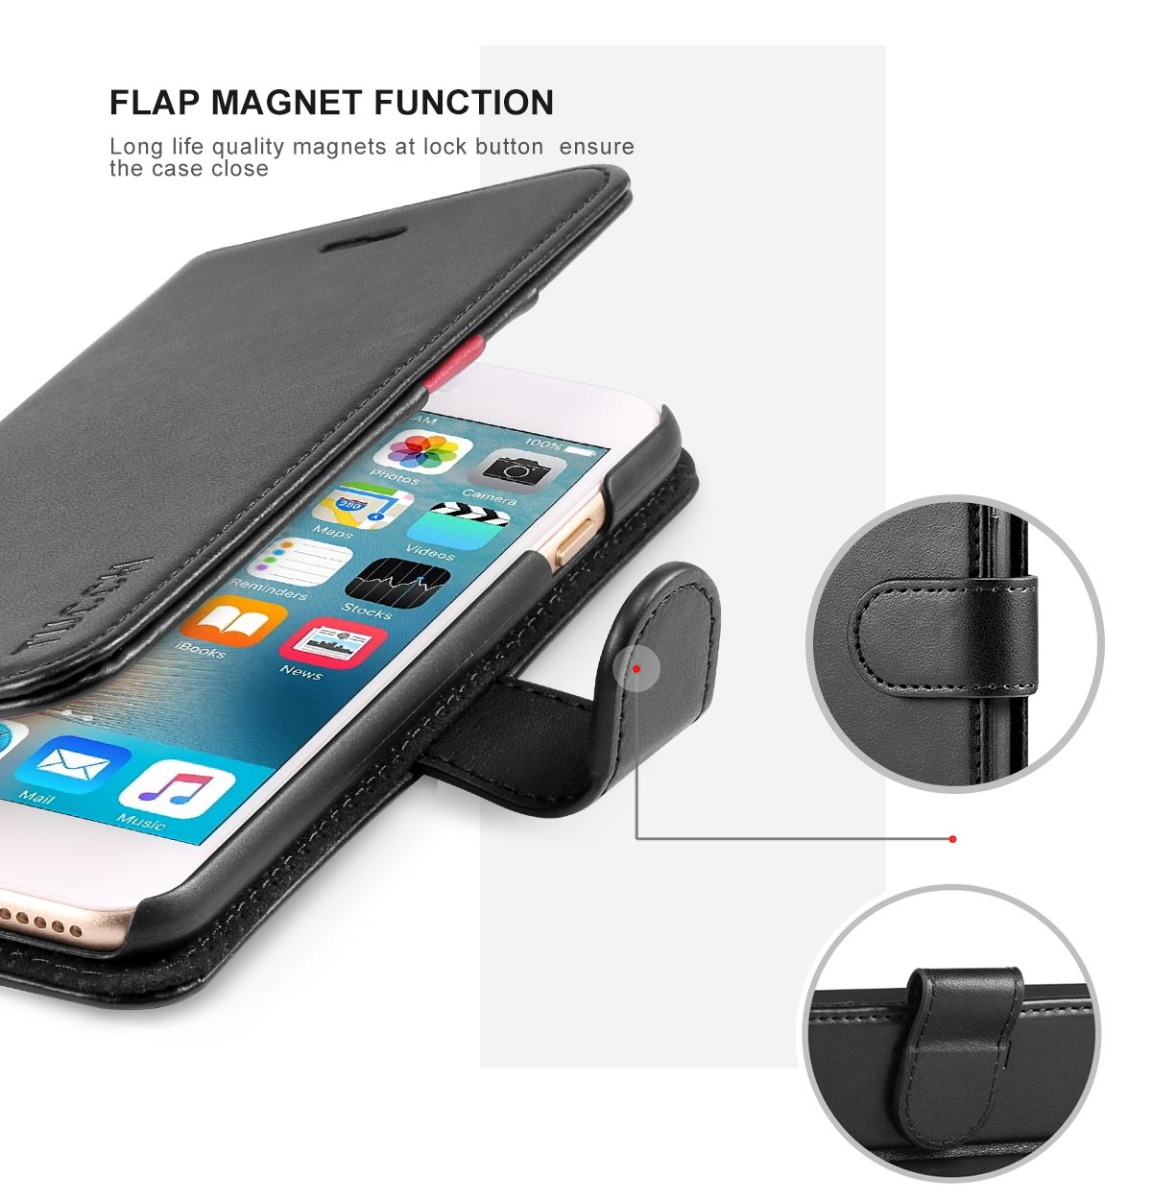 TUCCH iPhone 6s Wallet Case with Magnetic Clourse